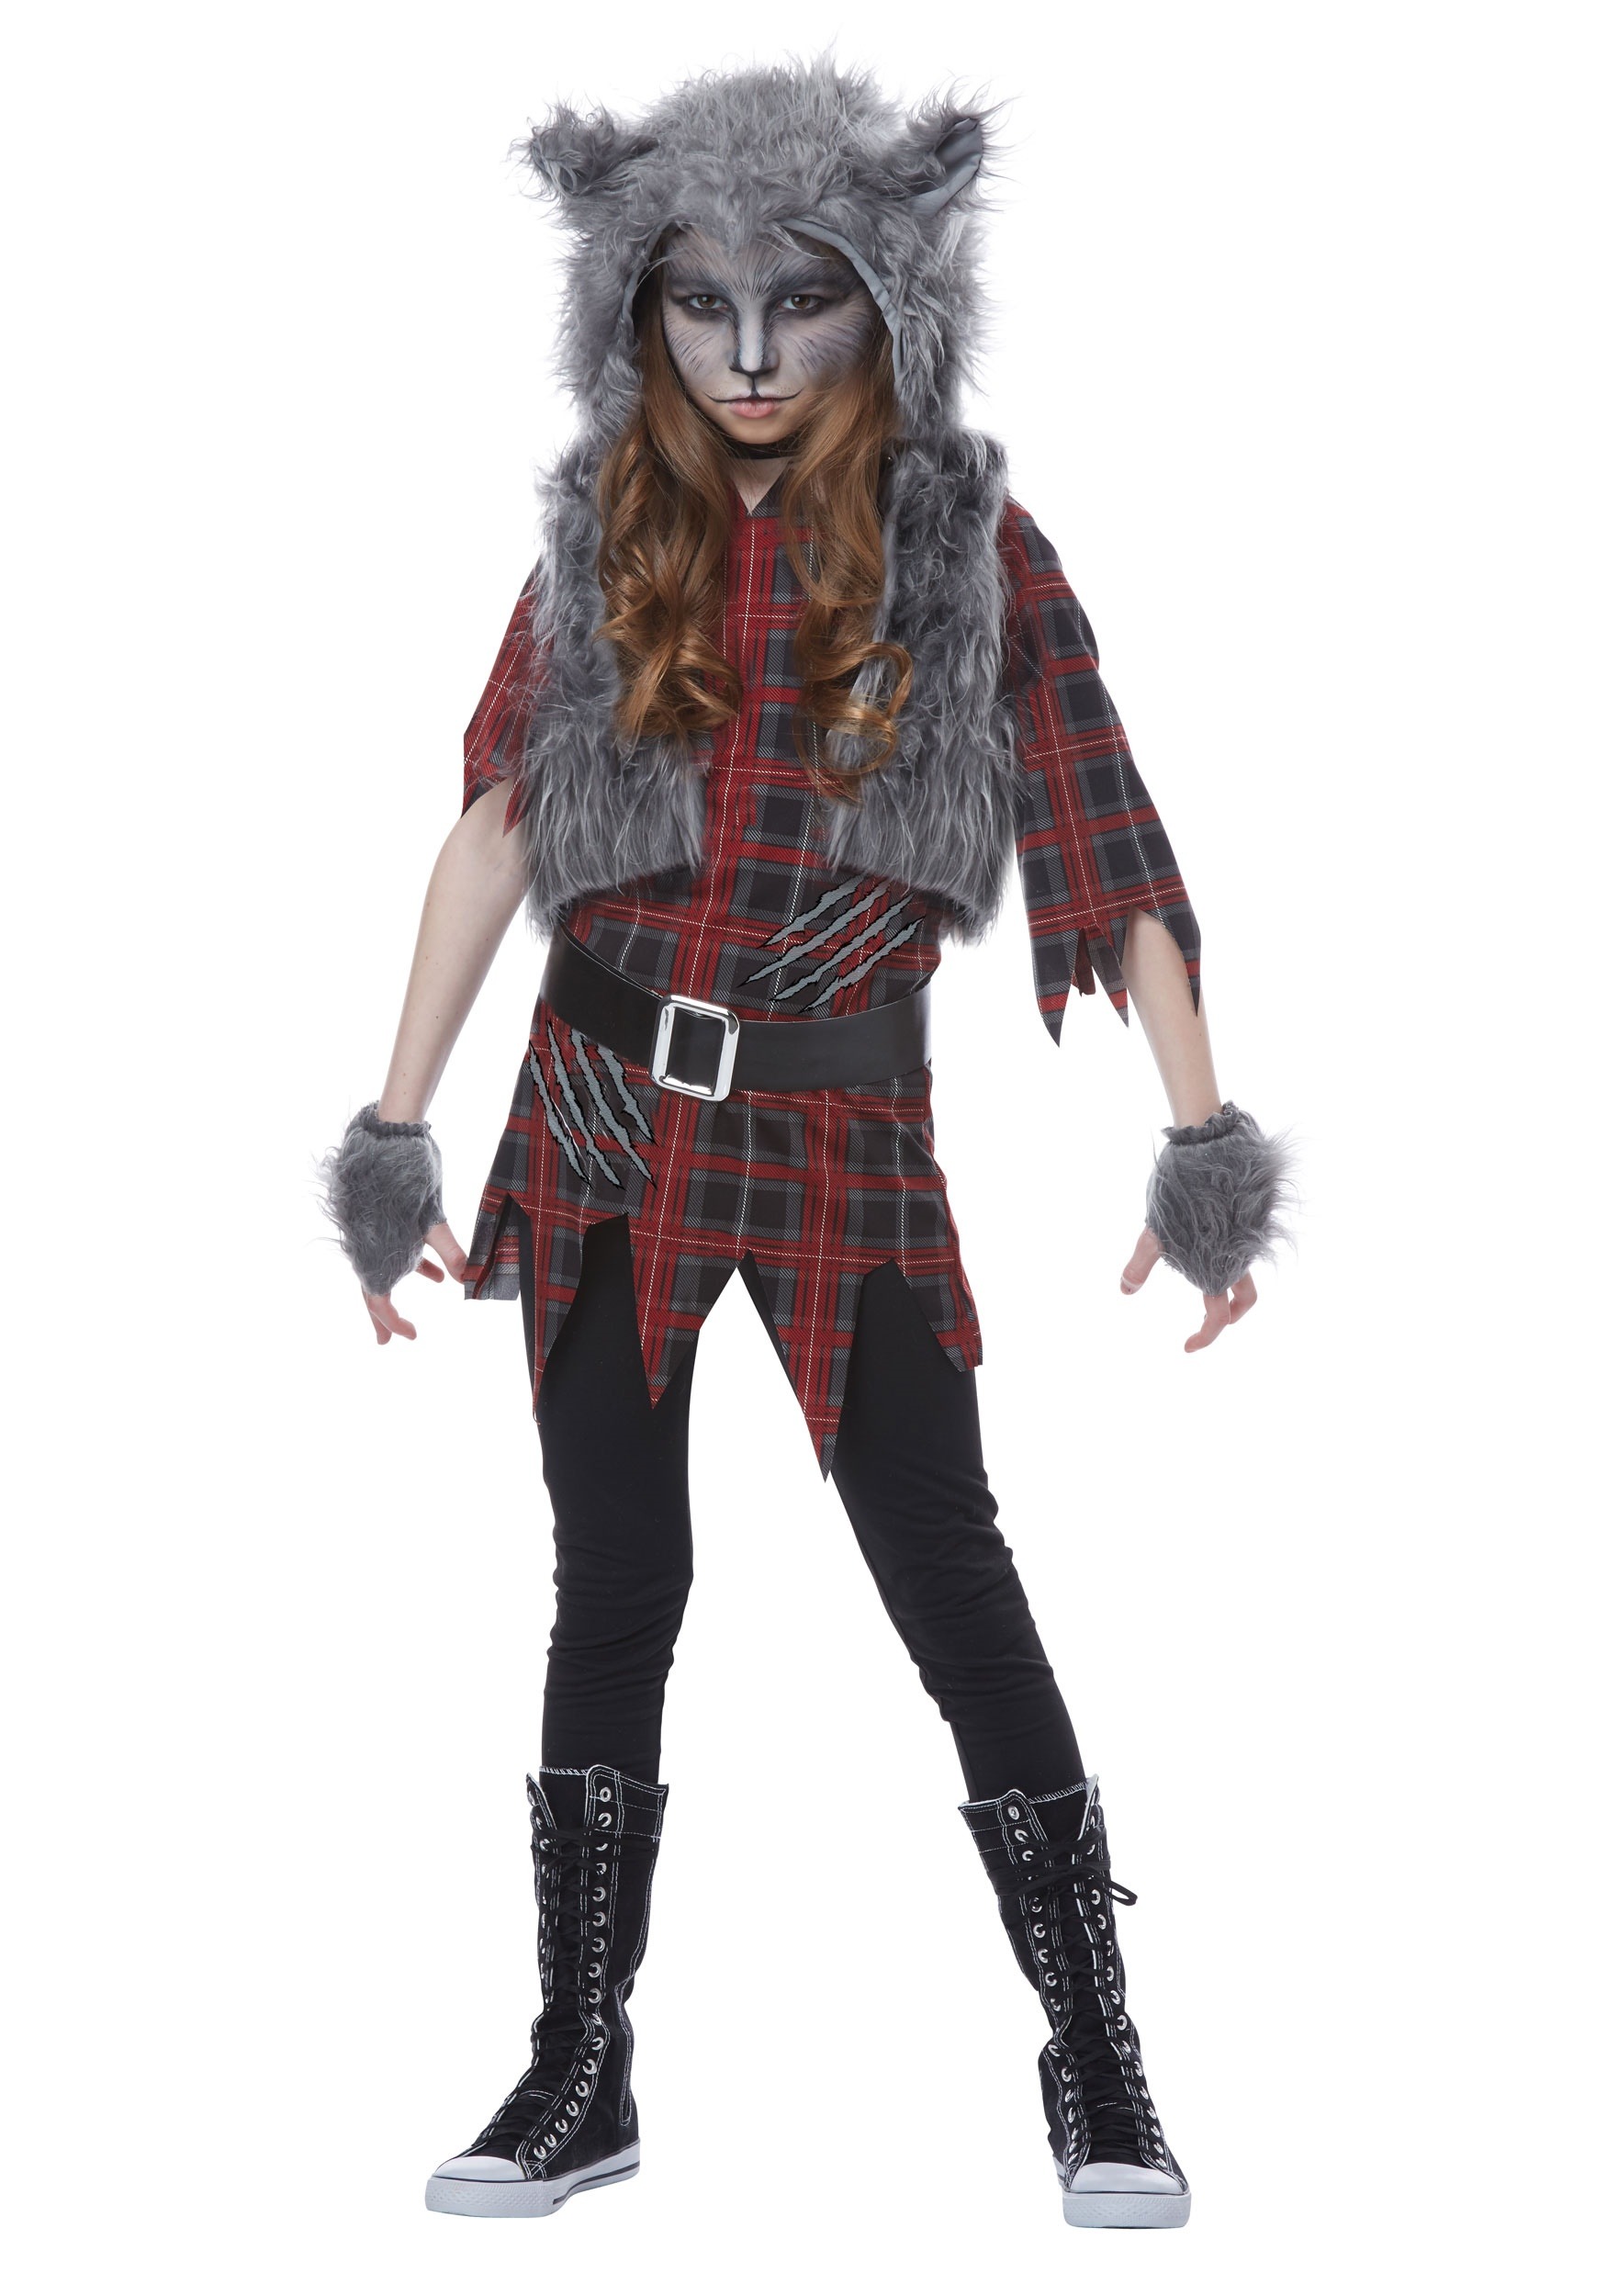 Photos - Fancy Dress California Costume Collection Werewolf Costume for Girls | Scary Halloween 